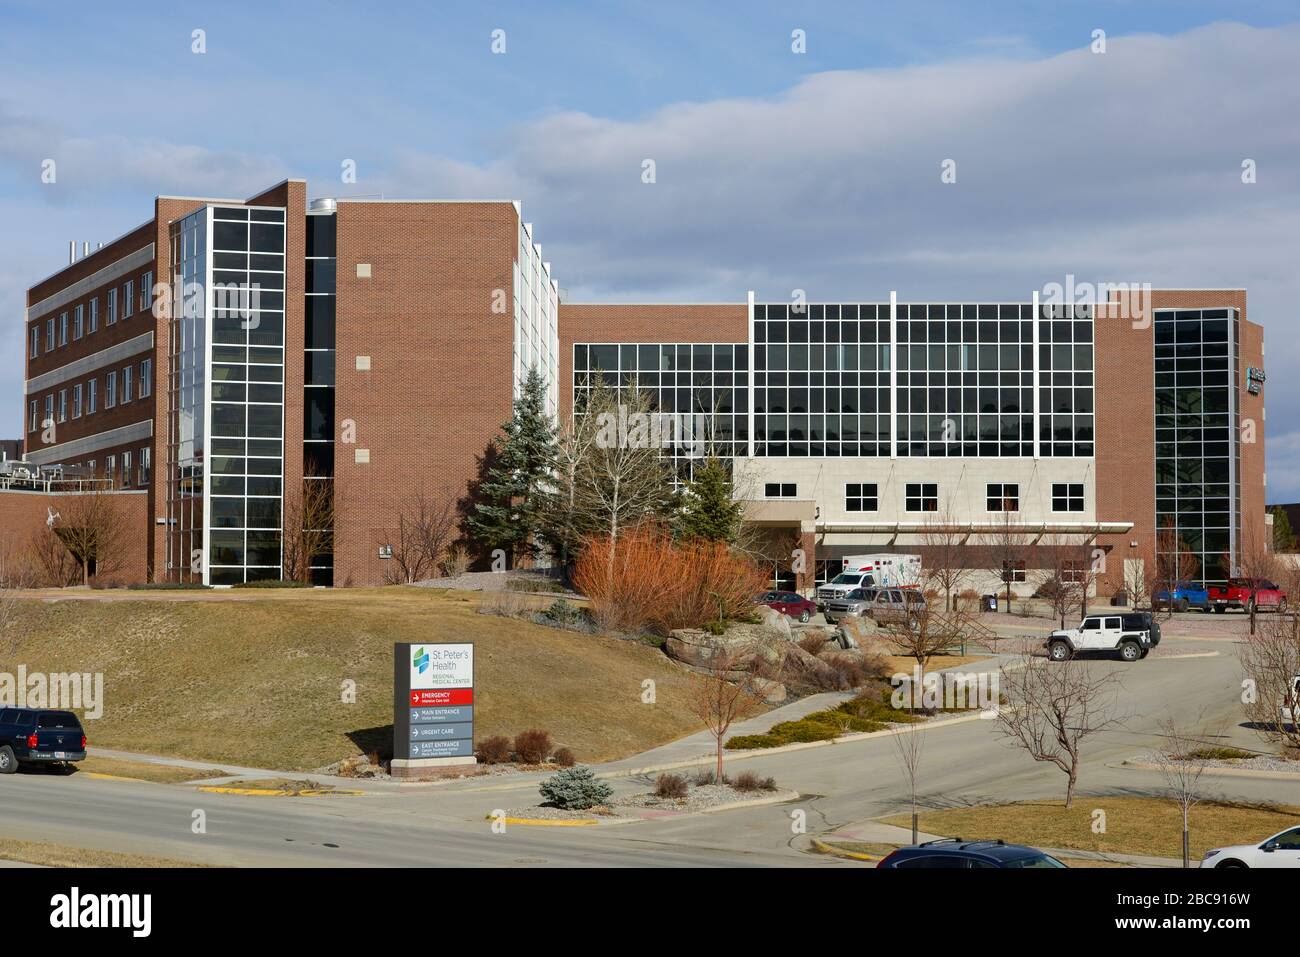 Helena, Montana / US - March 23, 2020: The exterior of St. Peter's Hospital Health Care Facility. A medical building in the city of Helena. Stock Photo